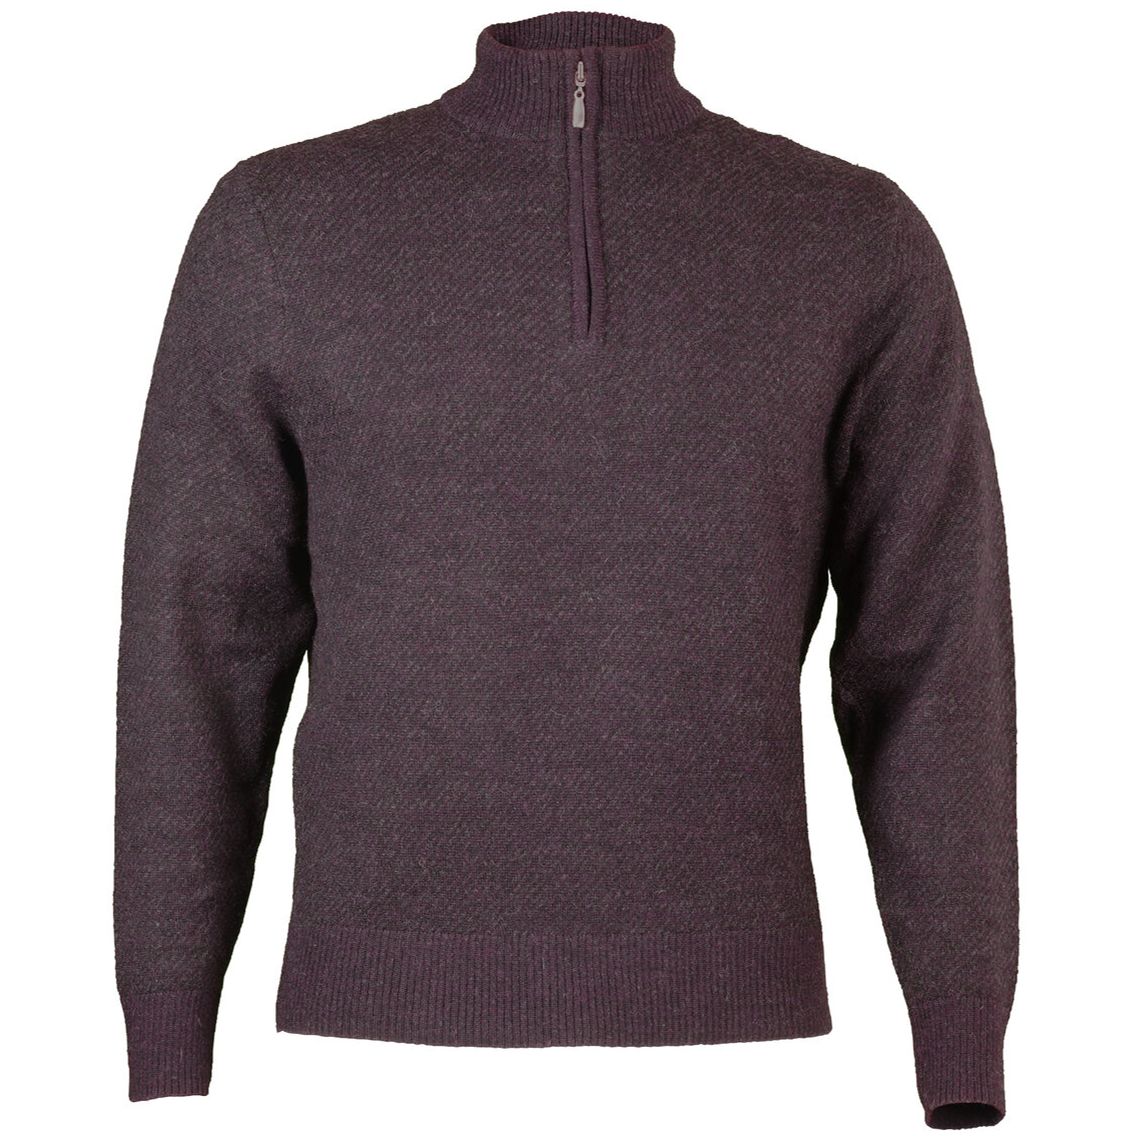 Royal Alpaca Diagonal Jacquard Half-Zip Lightweight Sweater in Wine and Charcoal Heather by Peru Unlimited